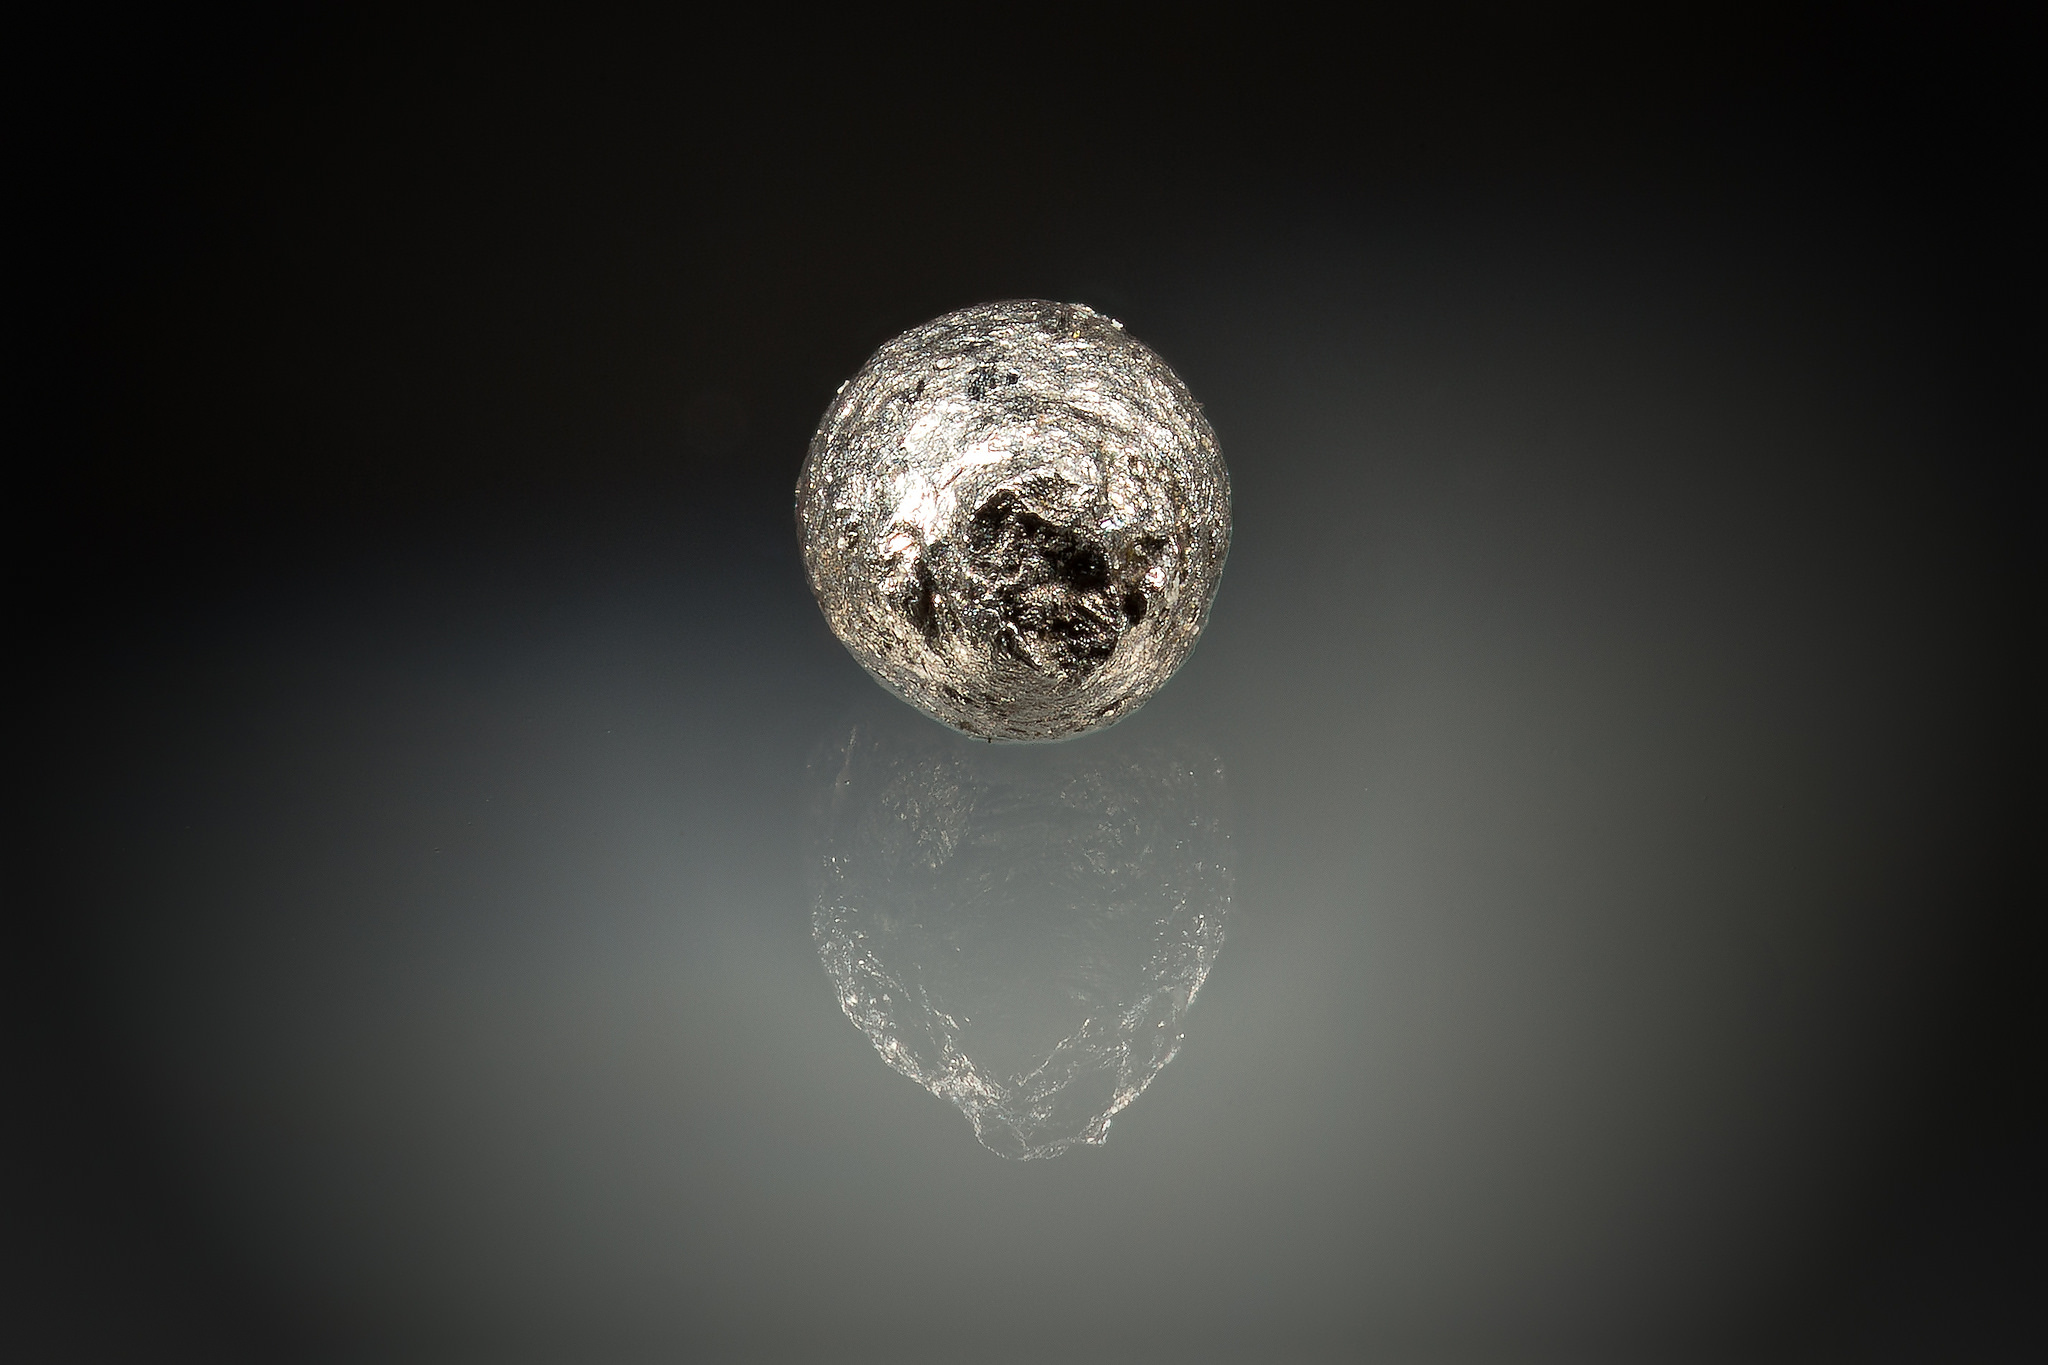 An isolated micrometeorite about 0.5 mm in diameter.